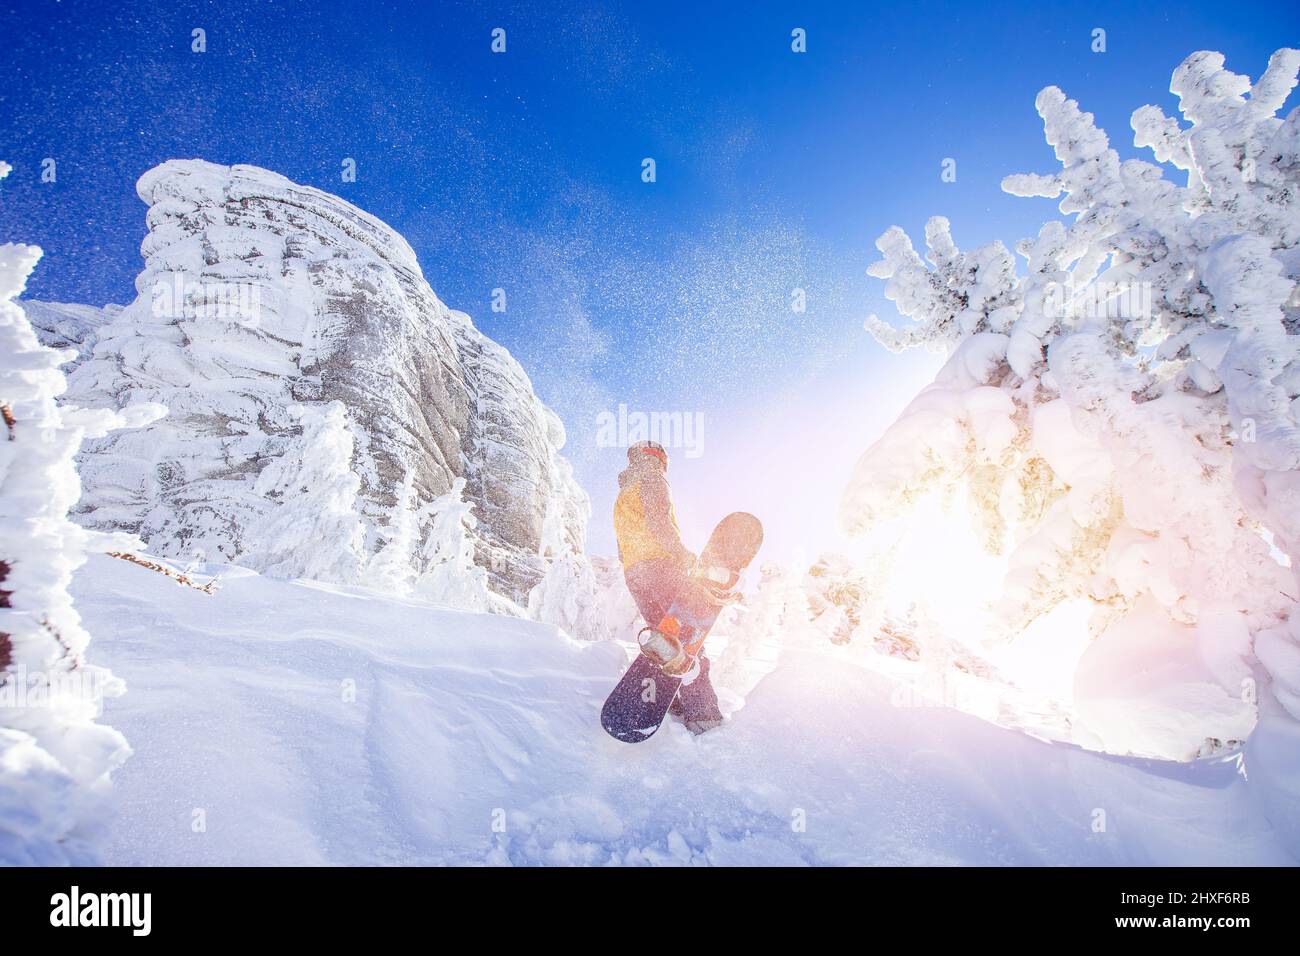 Snowboarder with snowboard background blue sky with sun light frozen rocks, Sheregesh ski resort. Concept extream freeride on fresh snow. Stock Photo